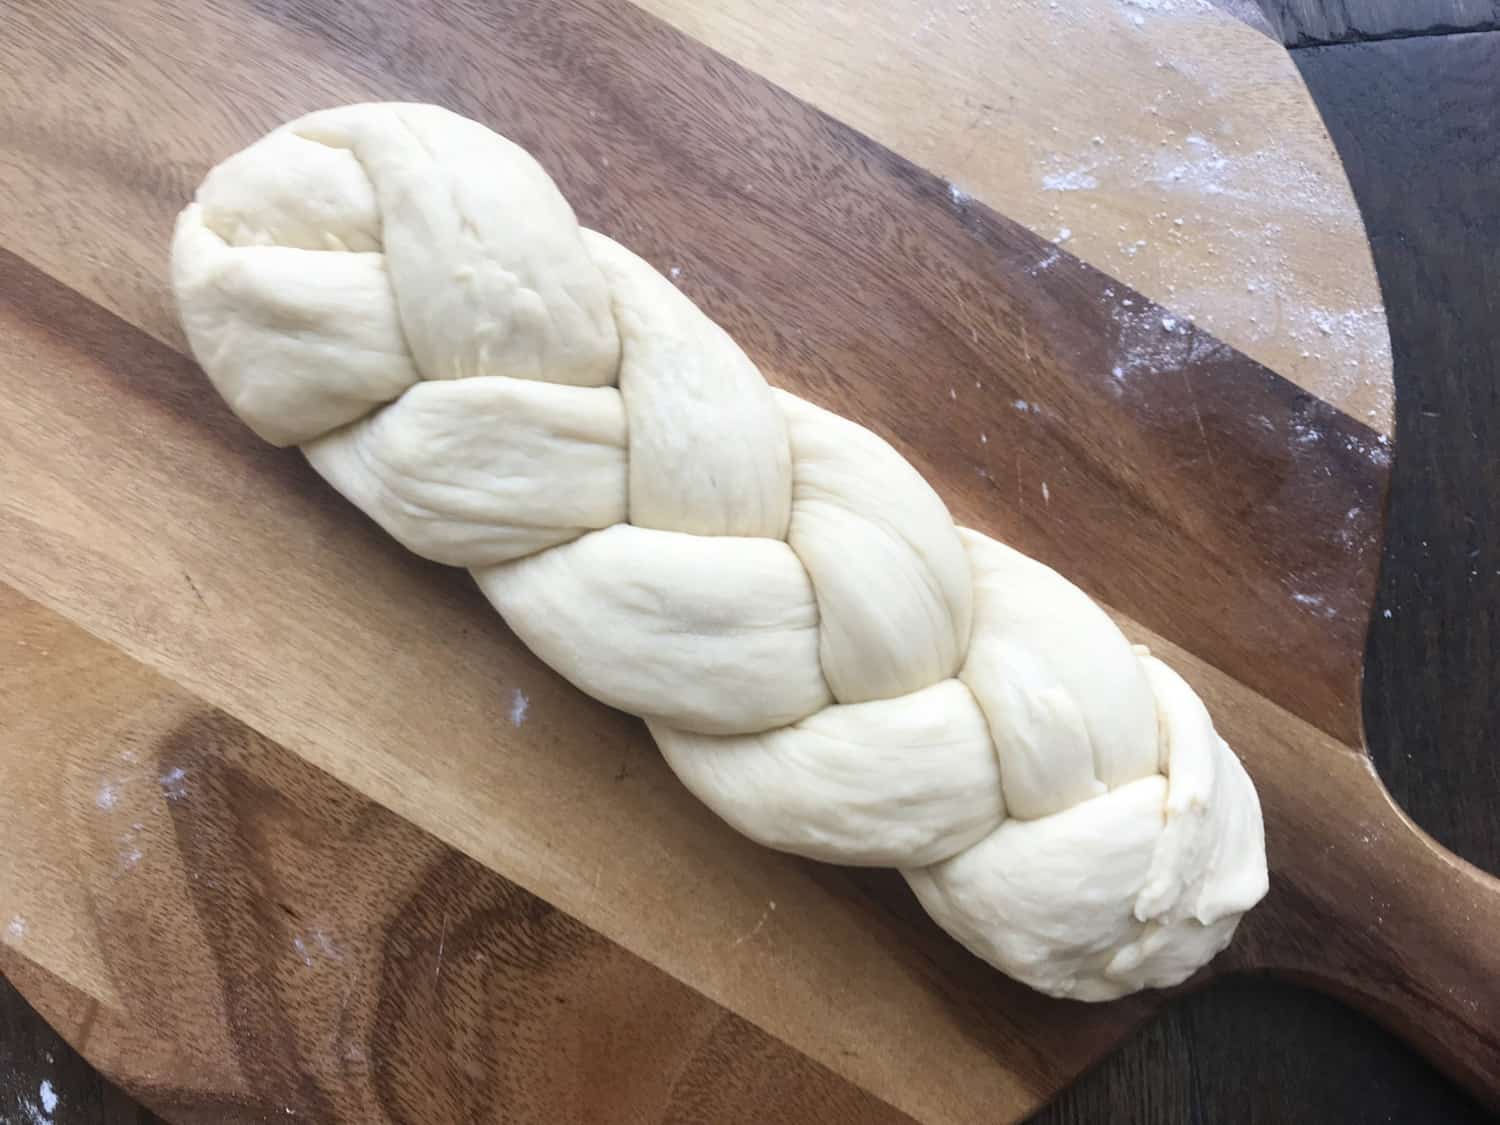 A brioche loaf that has been made into a plait